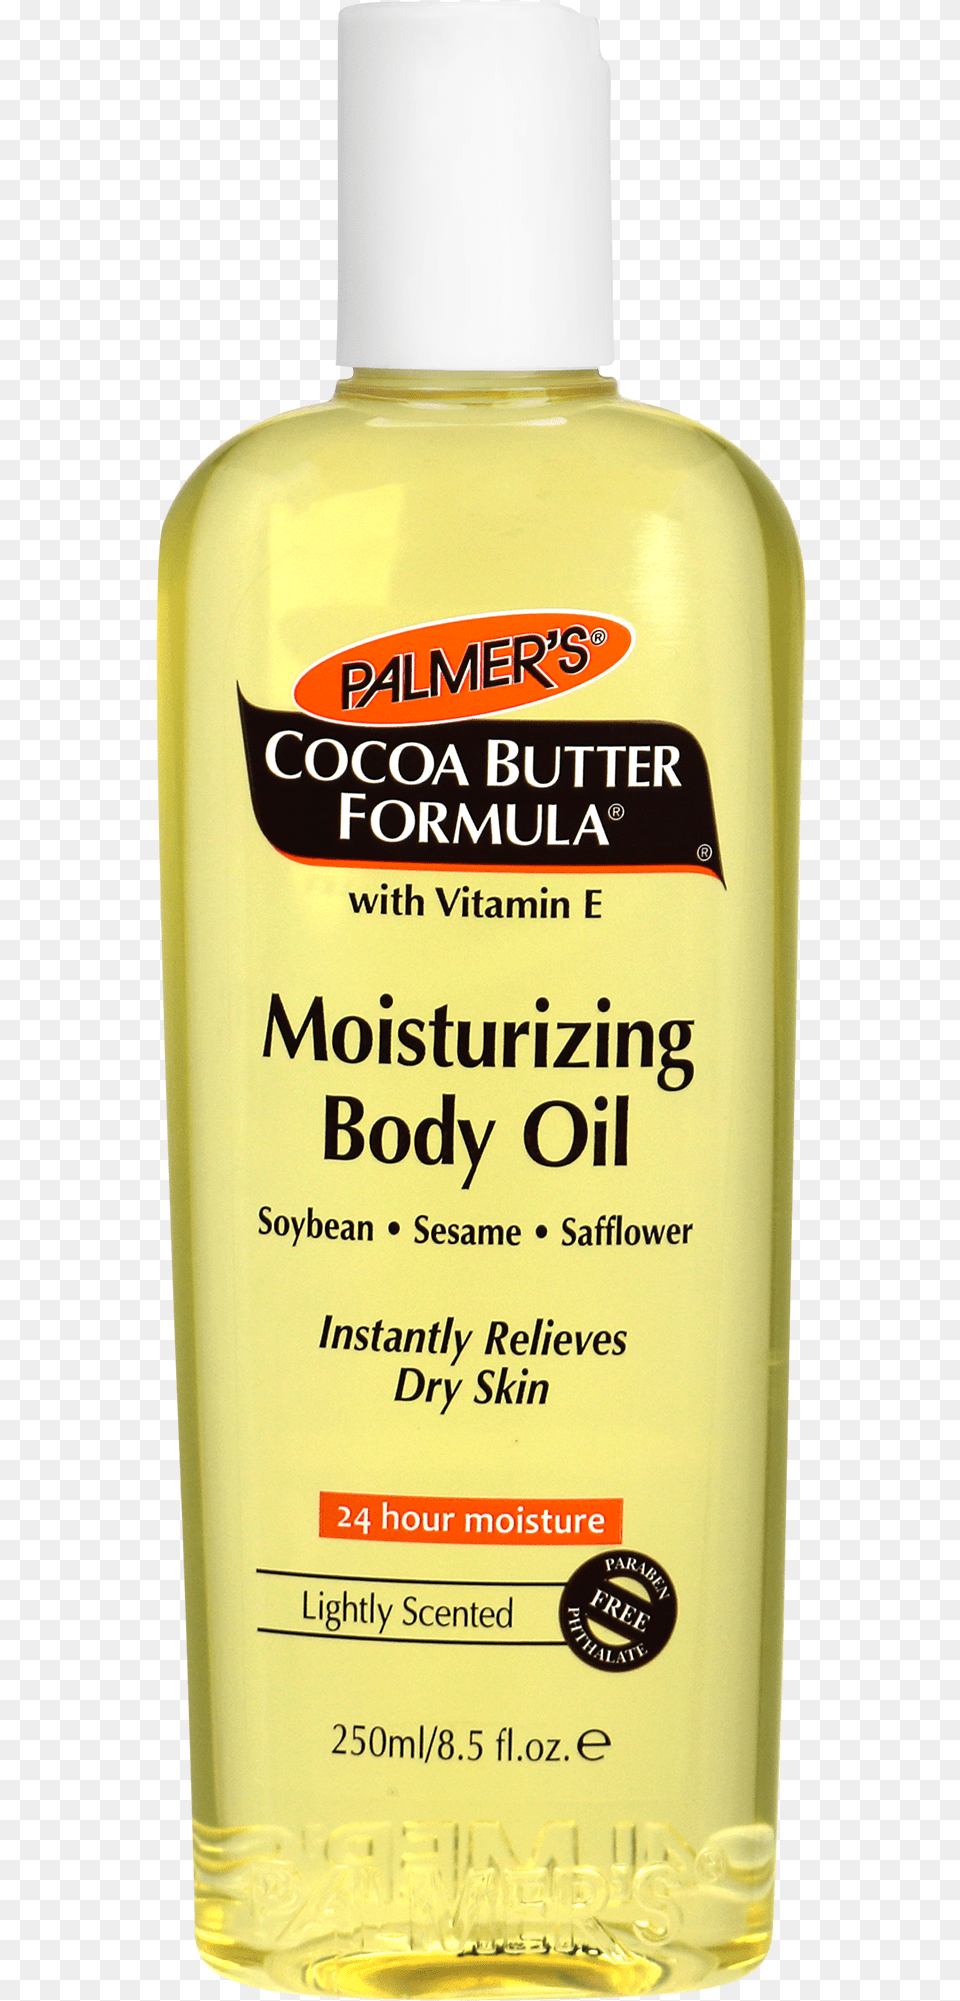 Palmers Cocoa Butter, Bottle, Shampoo, Cosmetics, Perfume Free Png Download